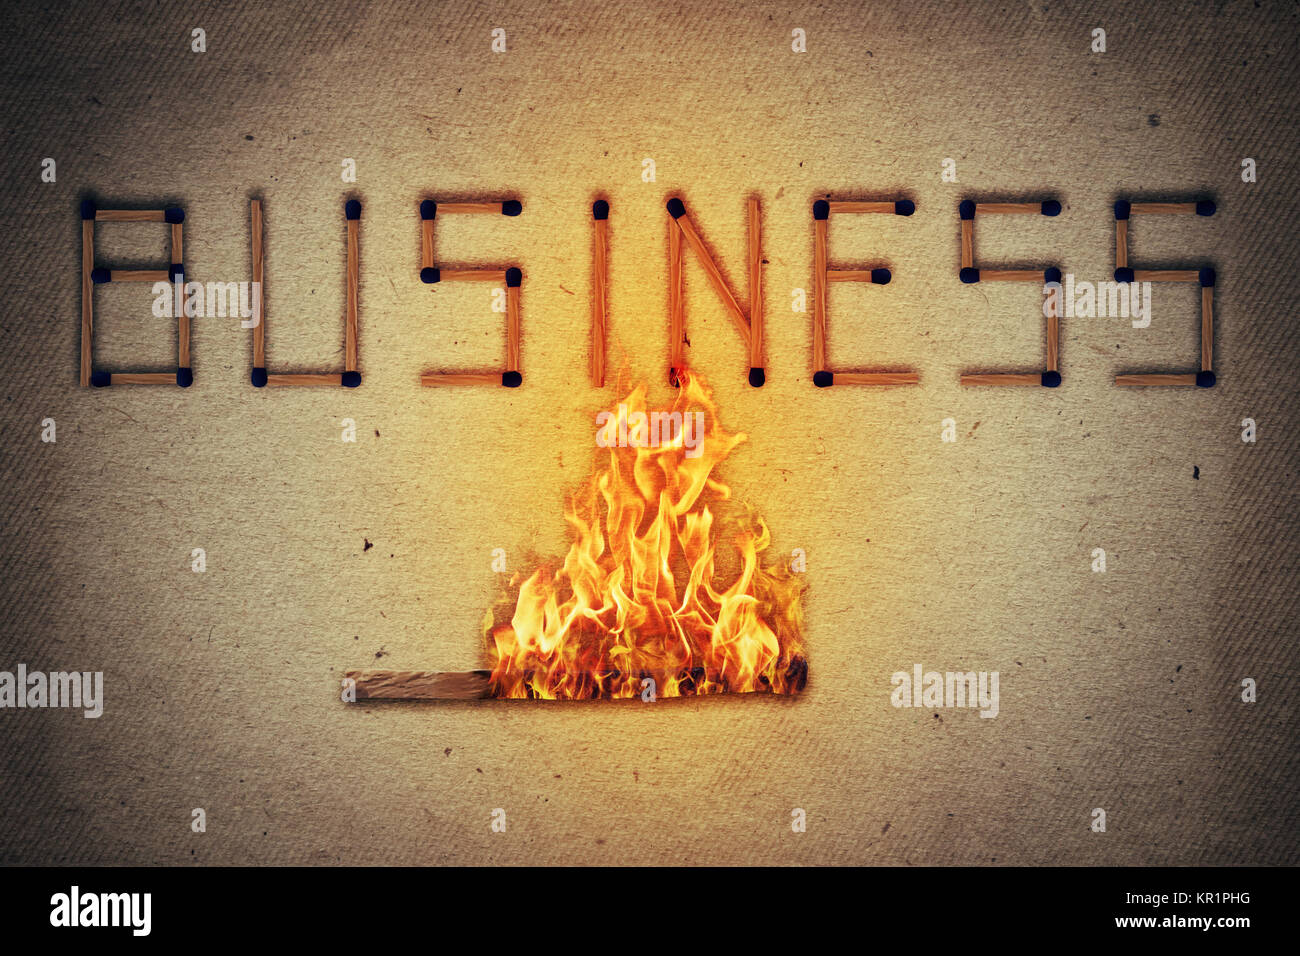 fired business Stock Photo